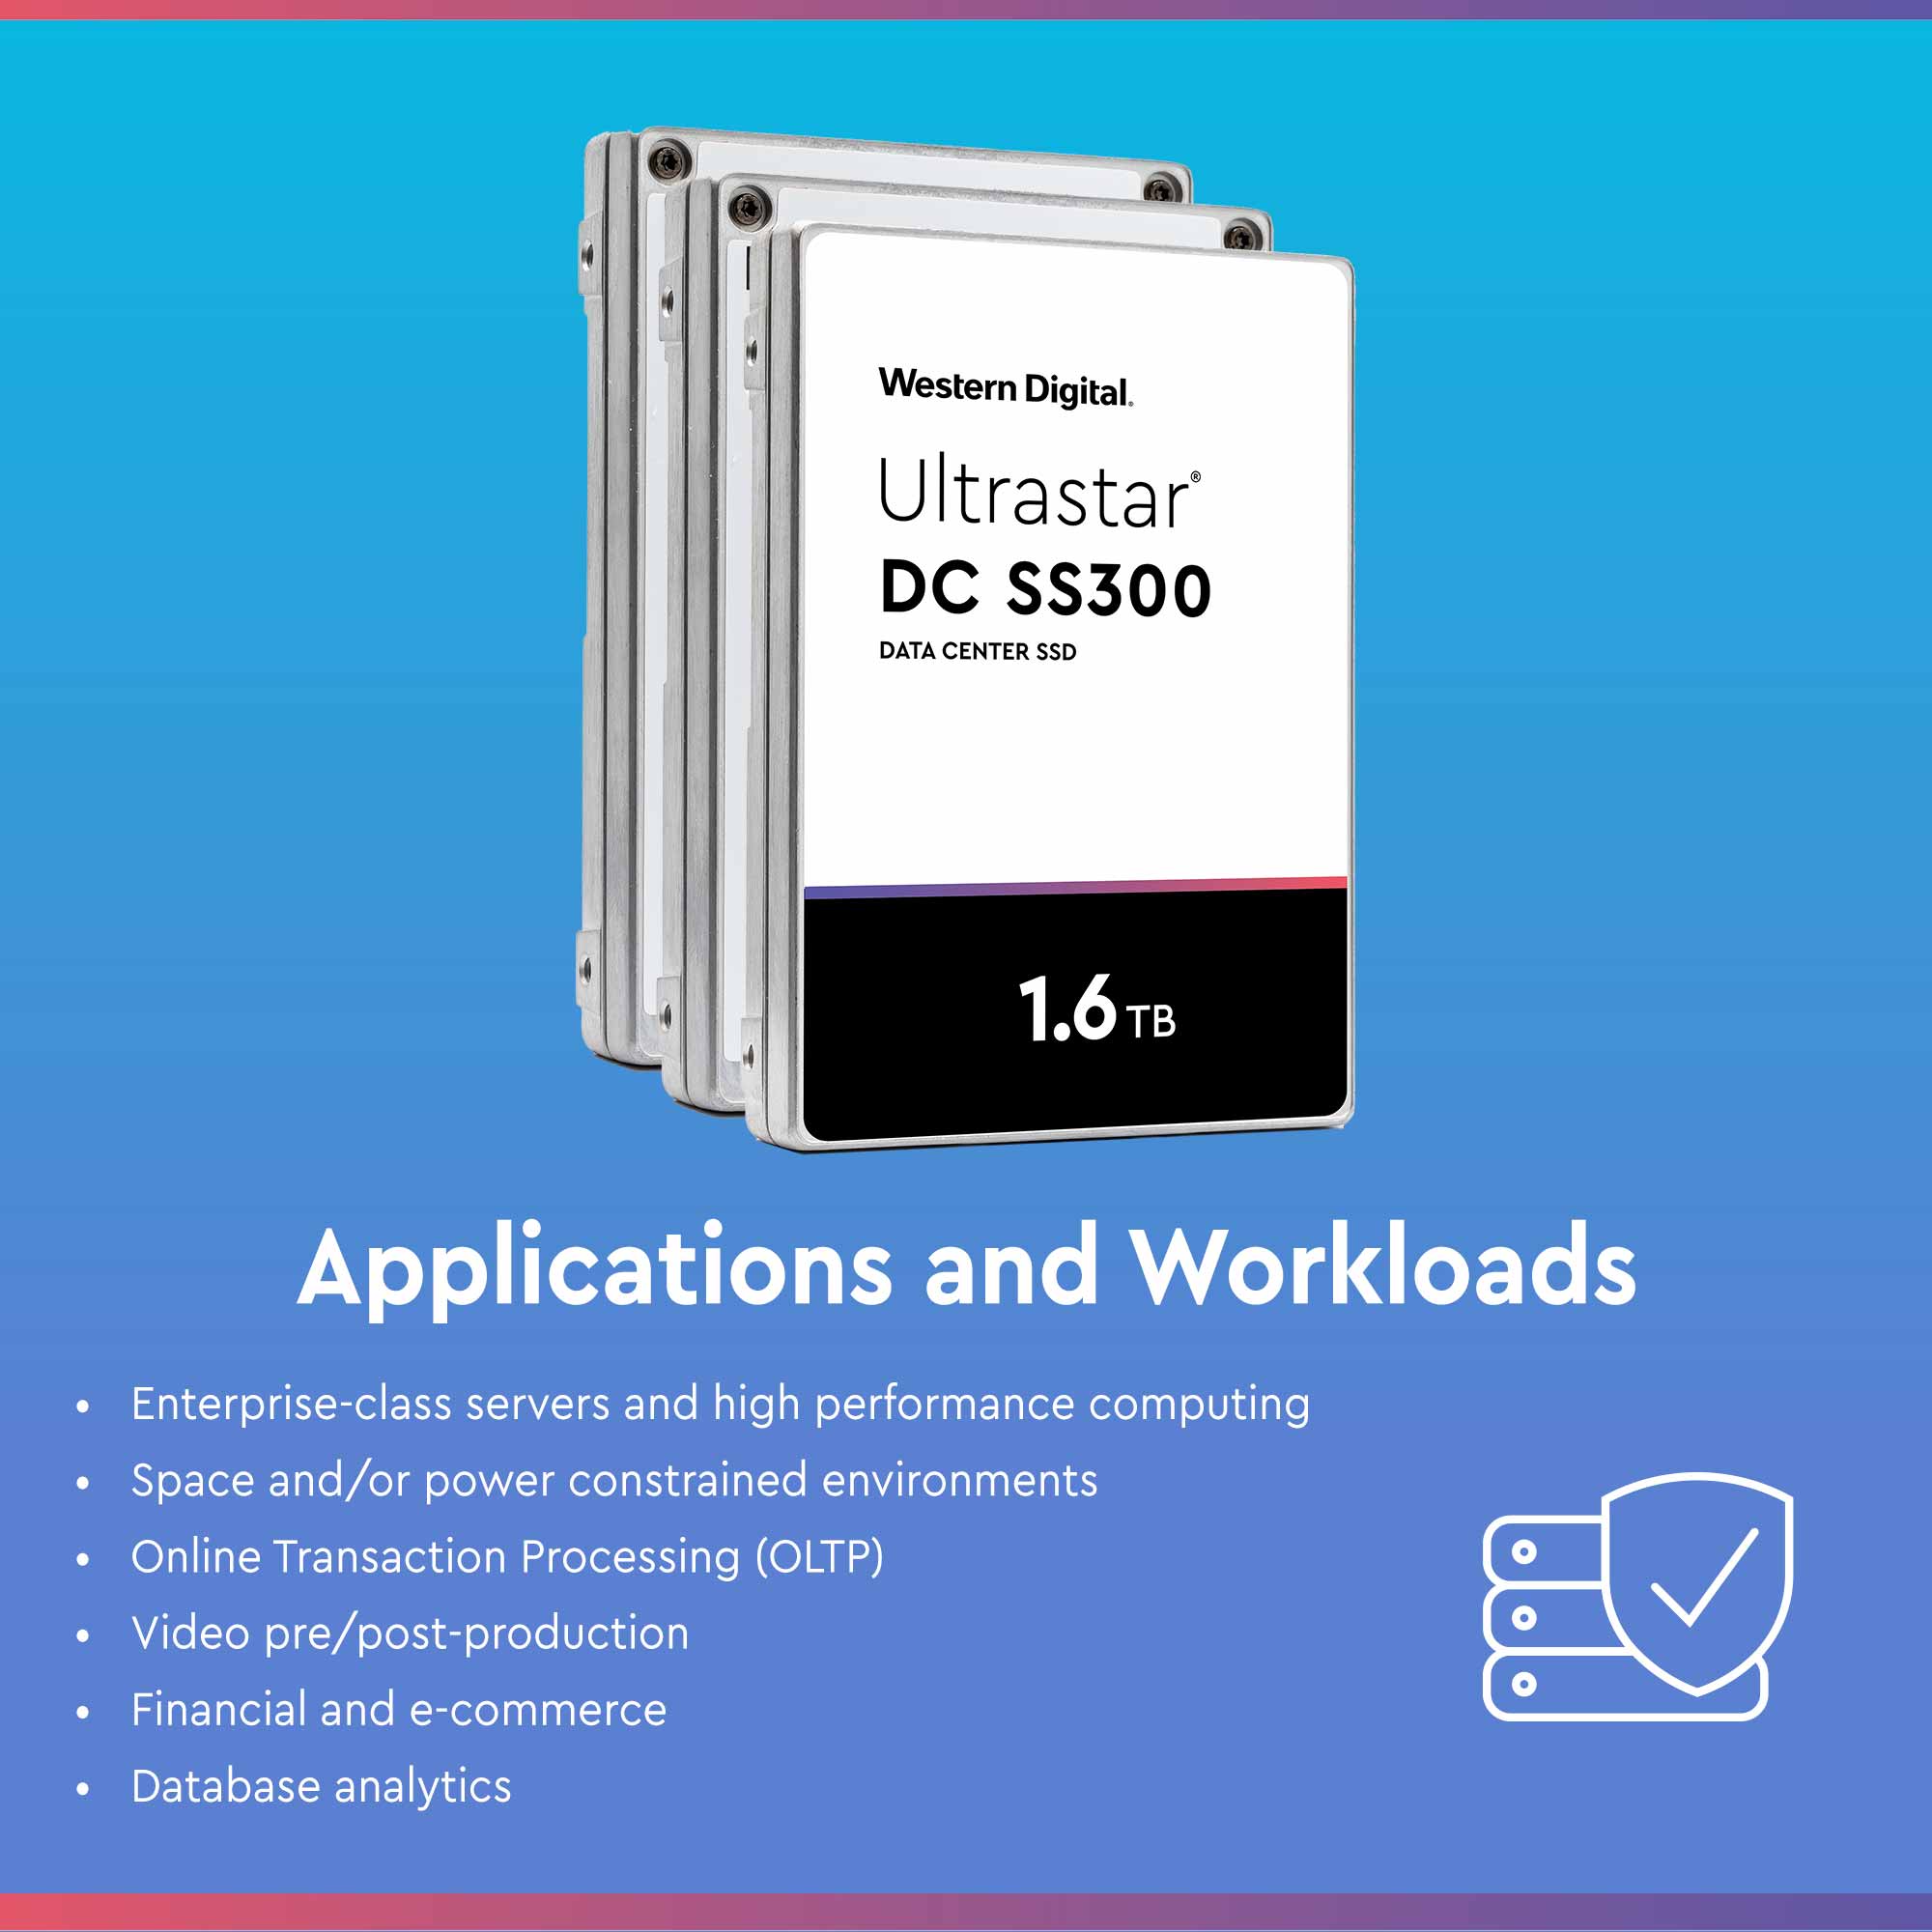 Western Digital DC SS300 HUSMM3216ASS204 1.6TB SAS 12Gb/s 512e 2.5in Refurbished SSD - Applications and Workloads